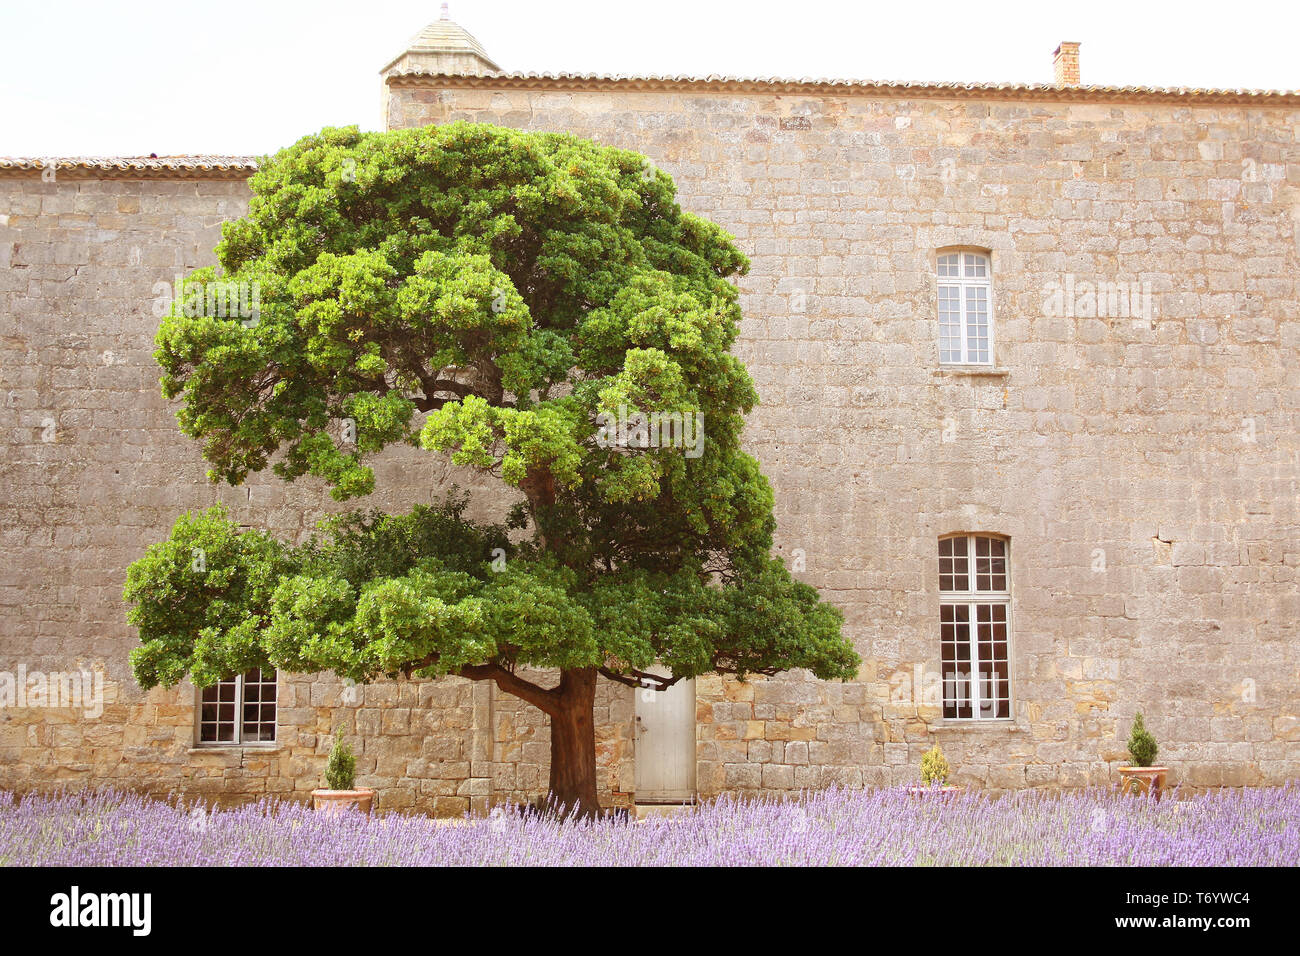 Abbey Fontfroide Narbonne. France Stock Photo